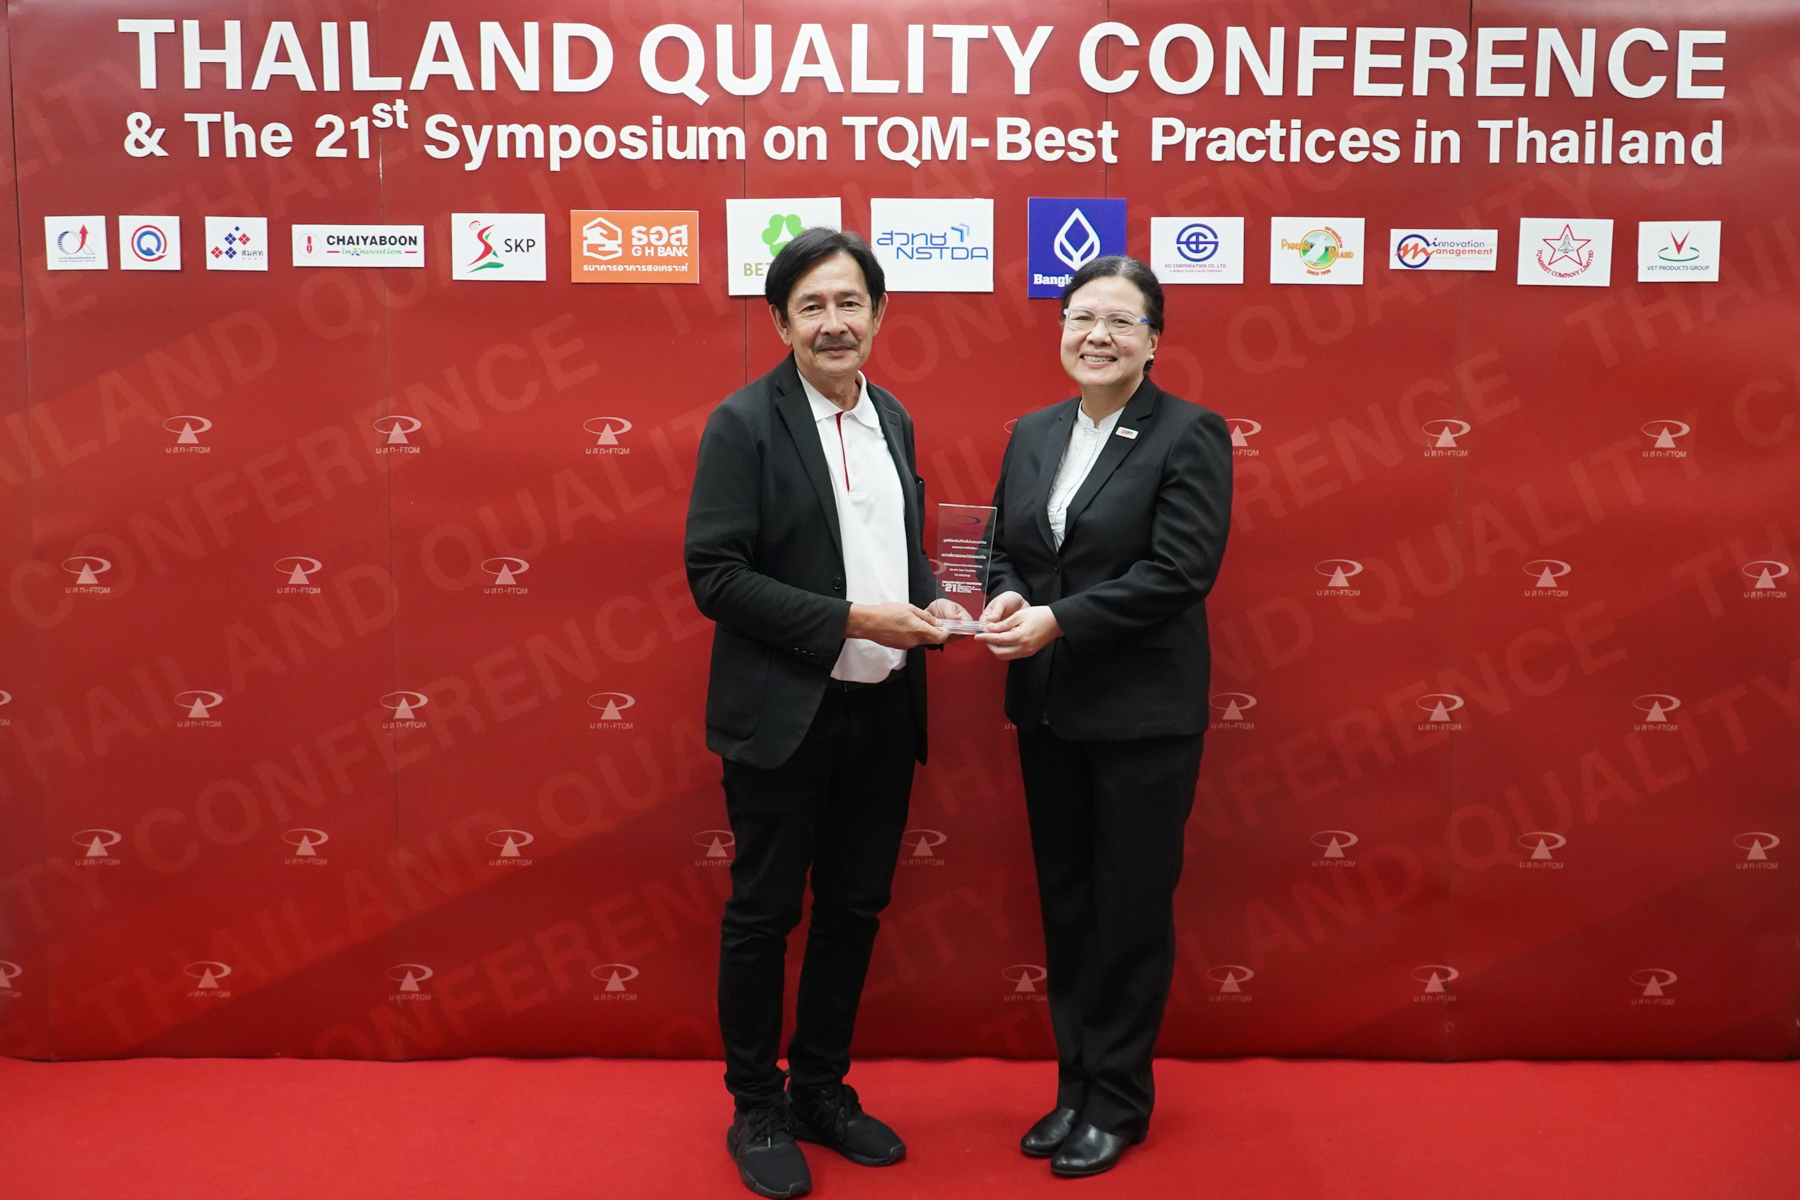 EXIM Thailand Receives TQM - Best Practices 2020 Award in Personnel Caring Category